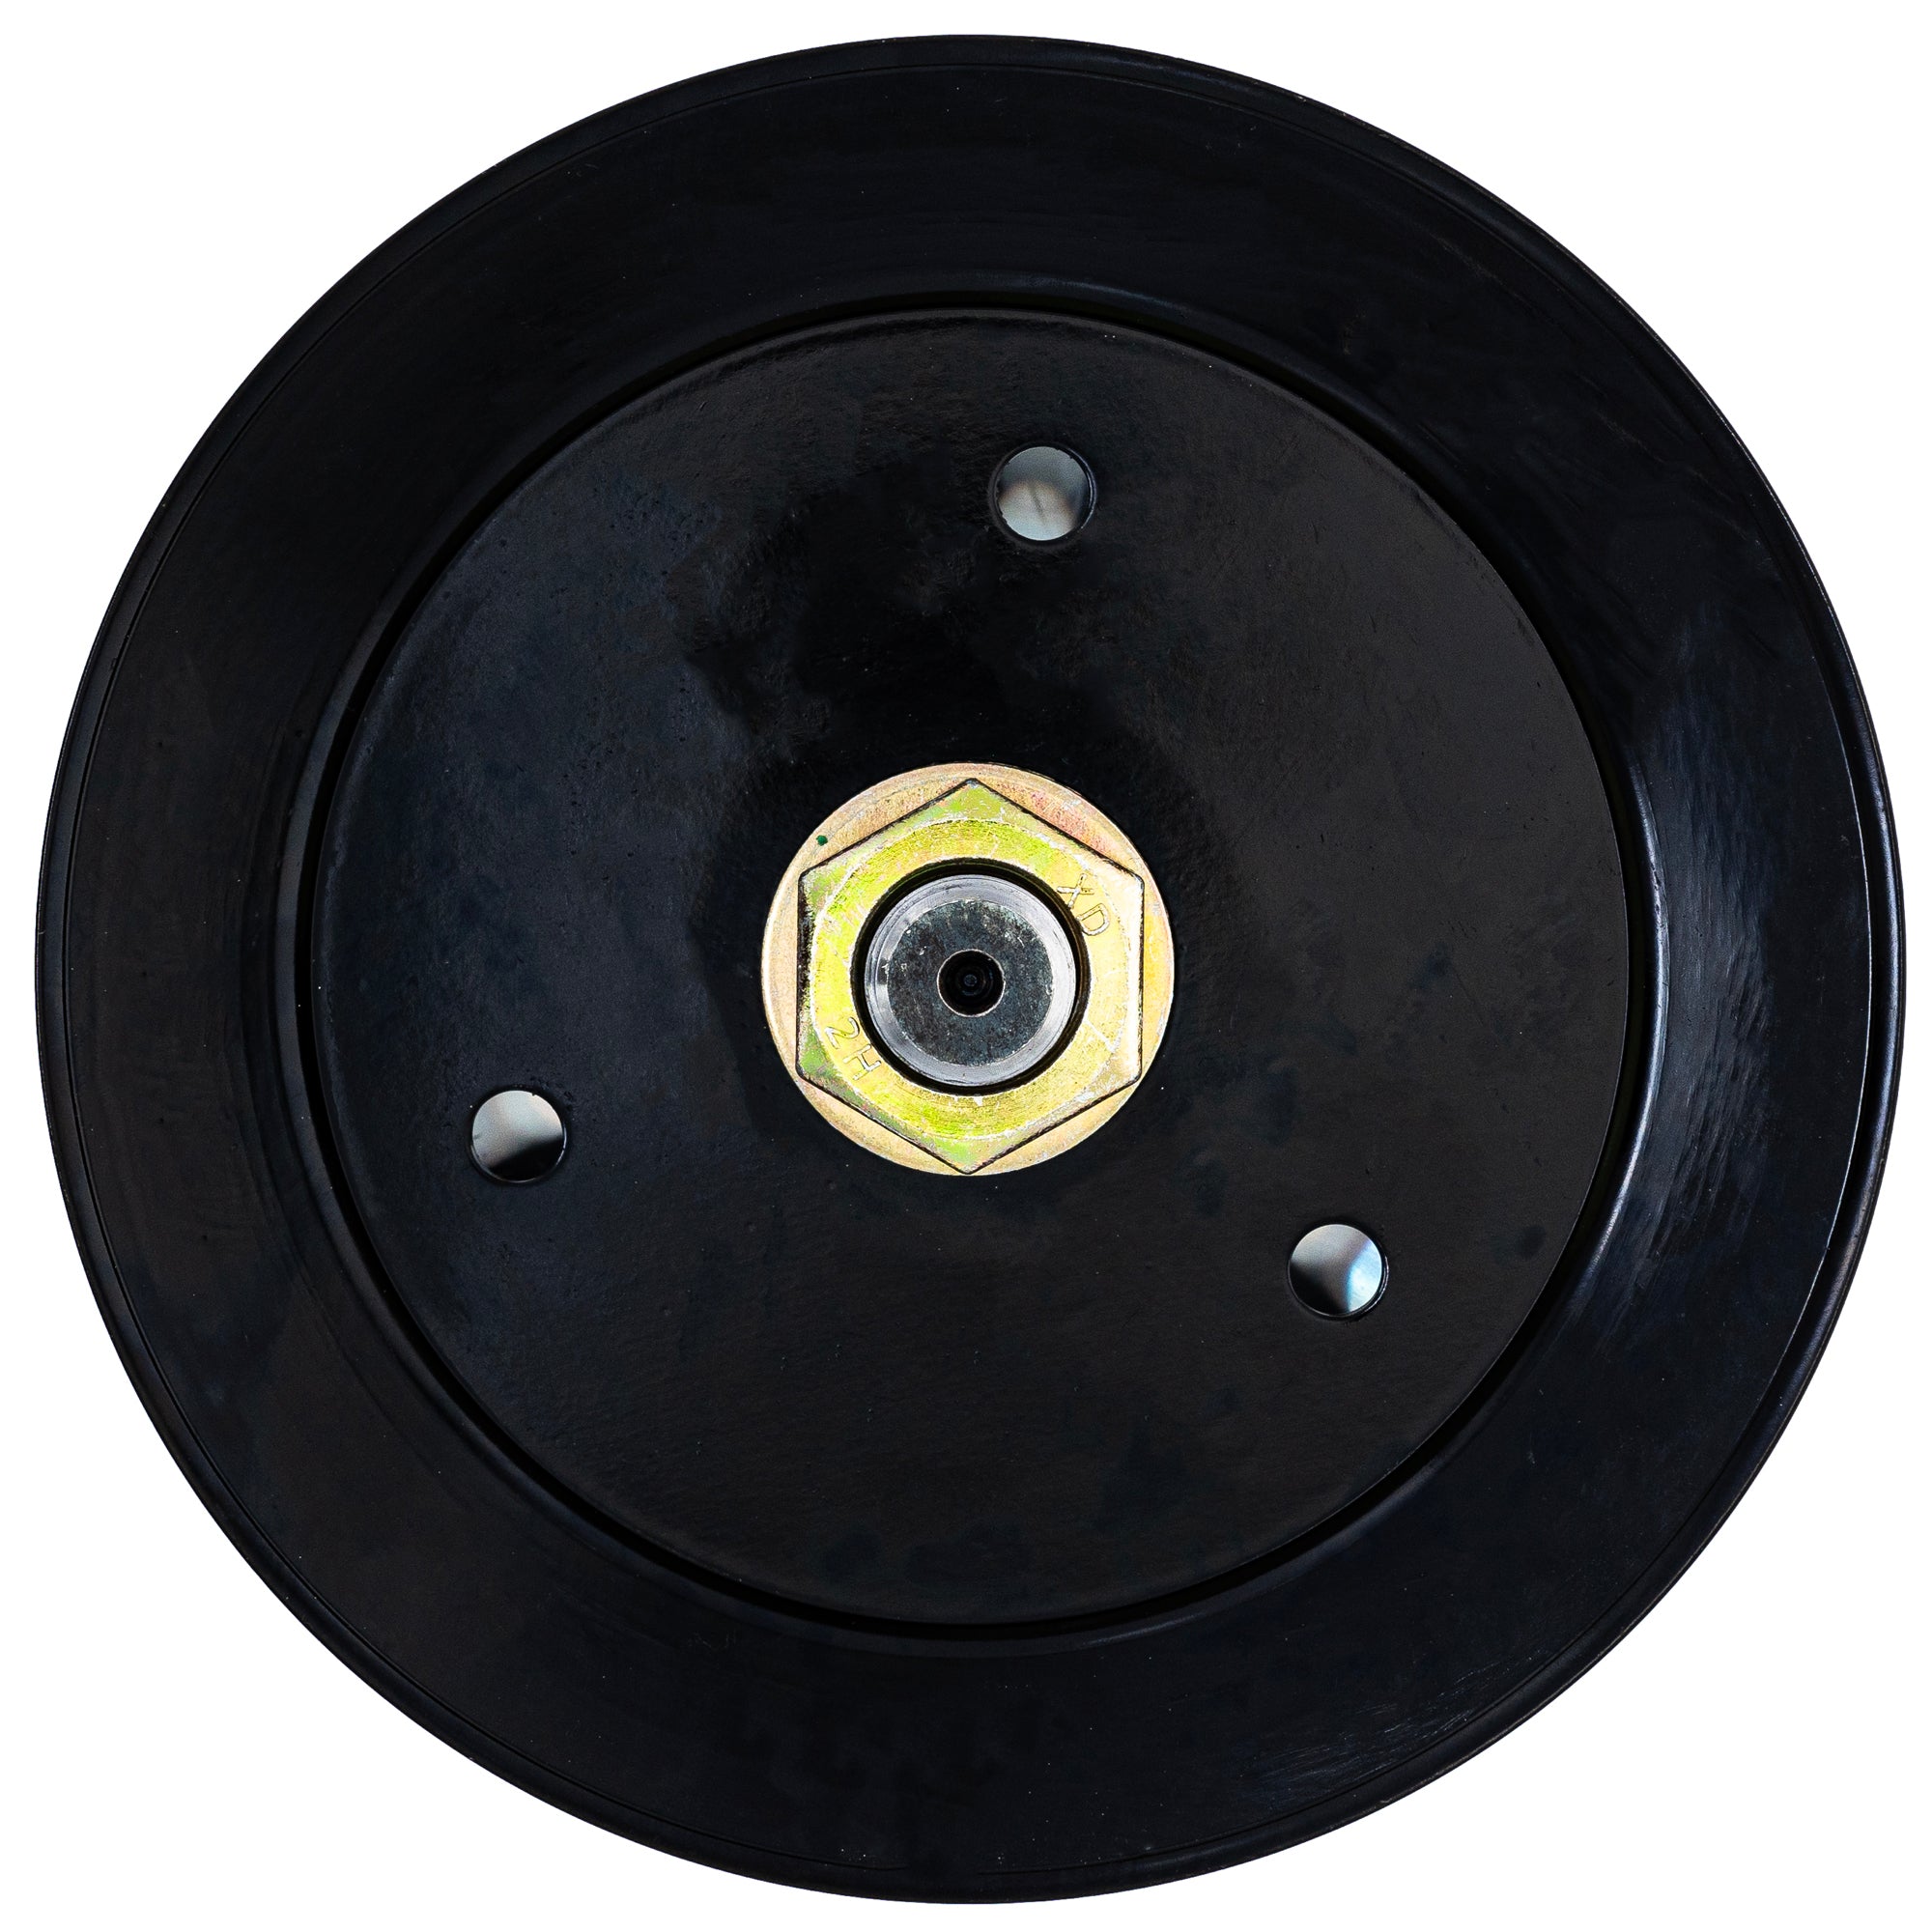 Mower Spindle for Exmark Lazer Z AS Vantage 109-9018 52-Inch Deck 3